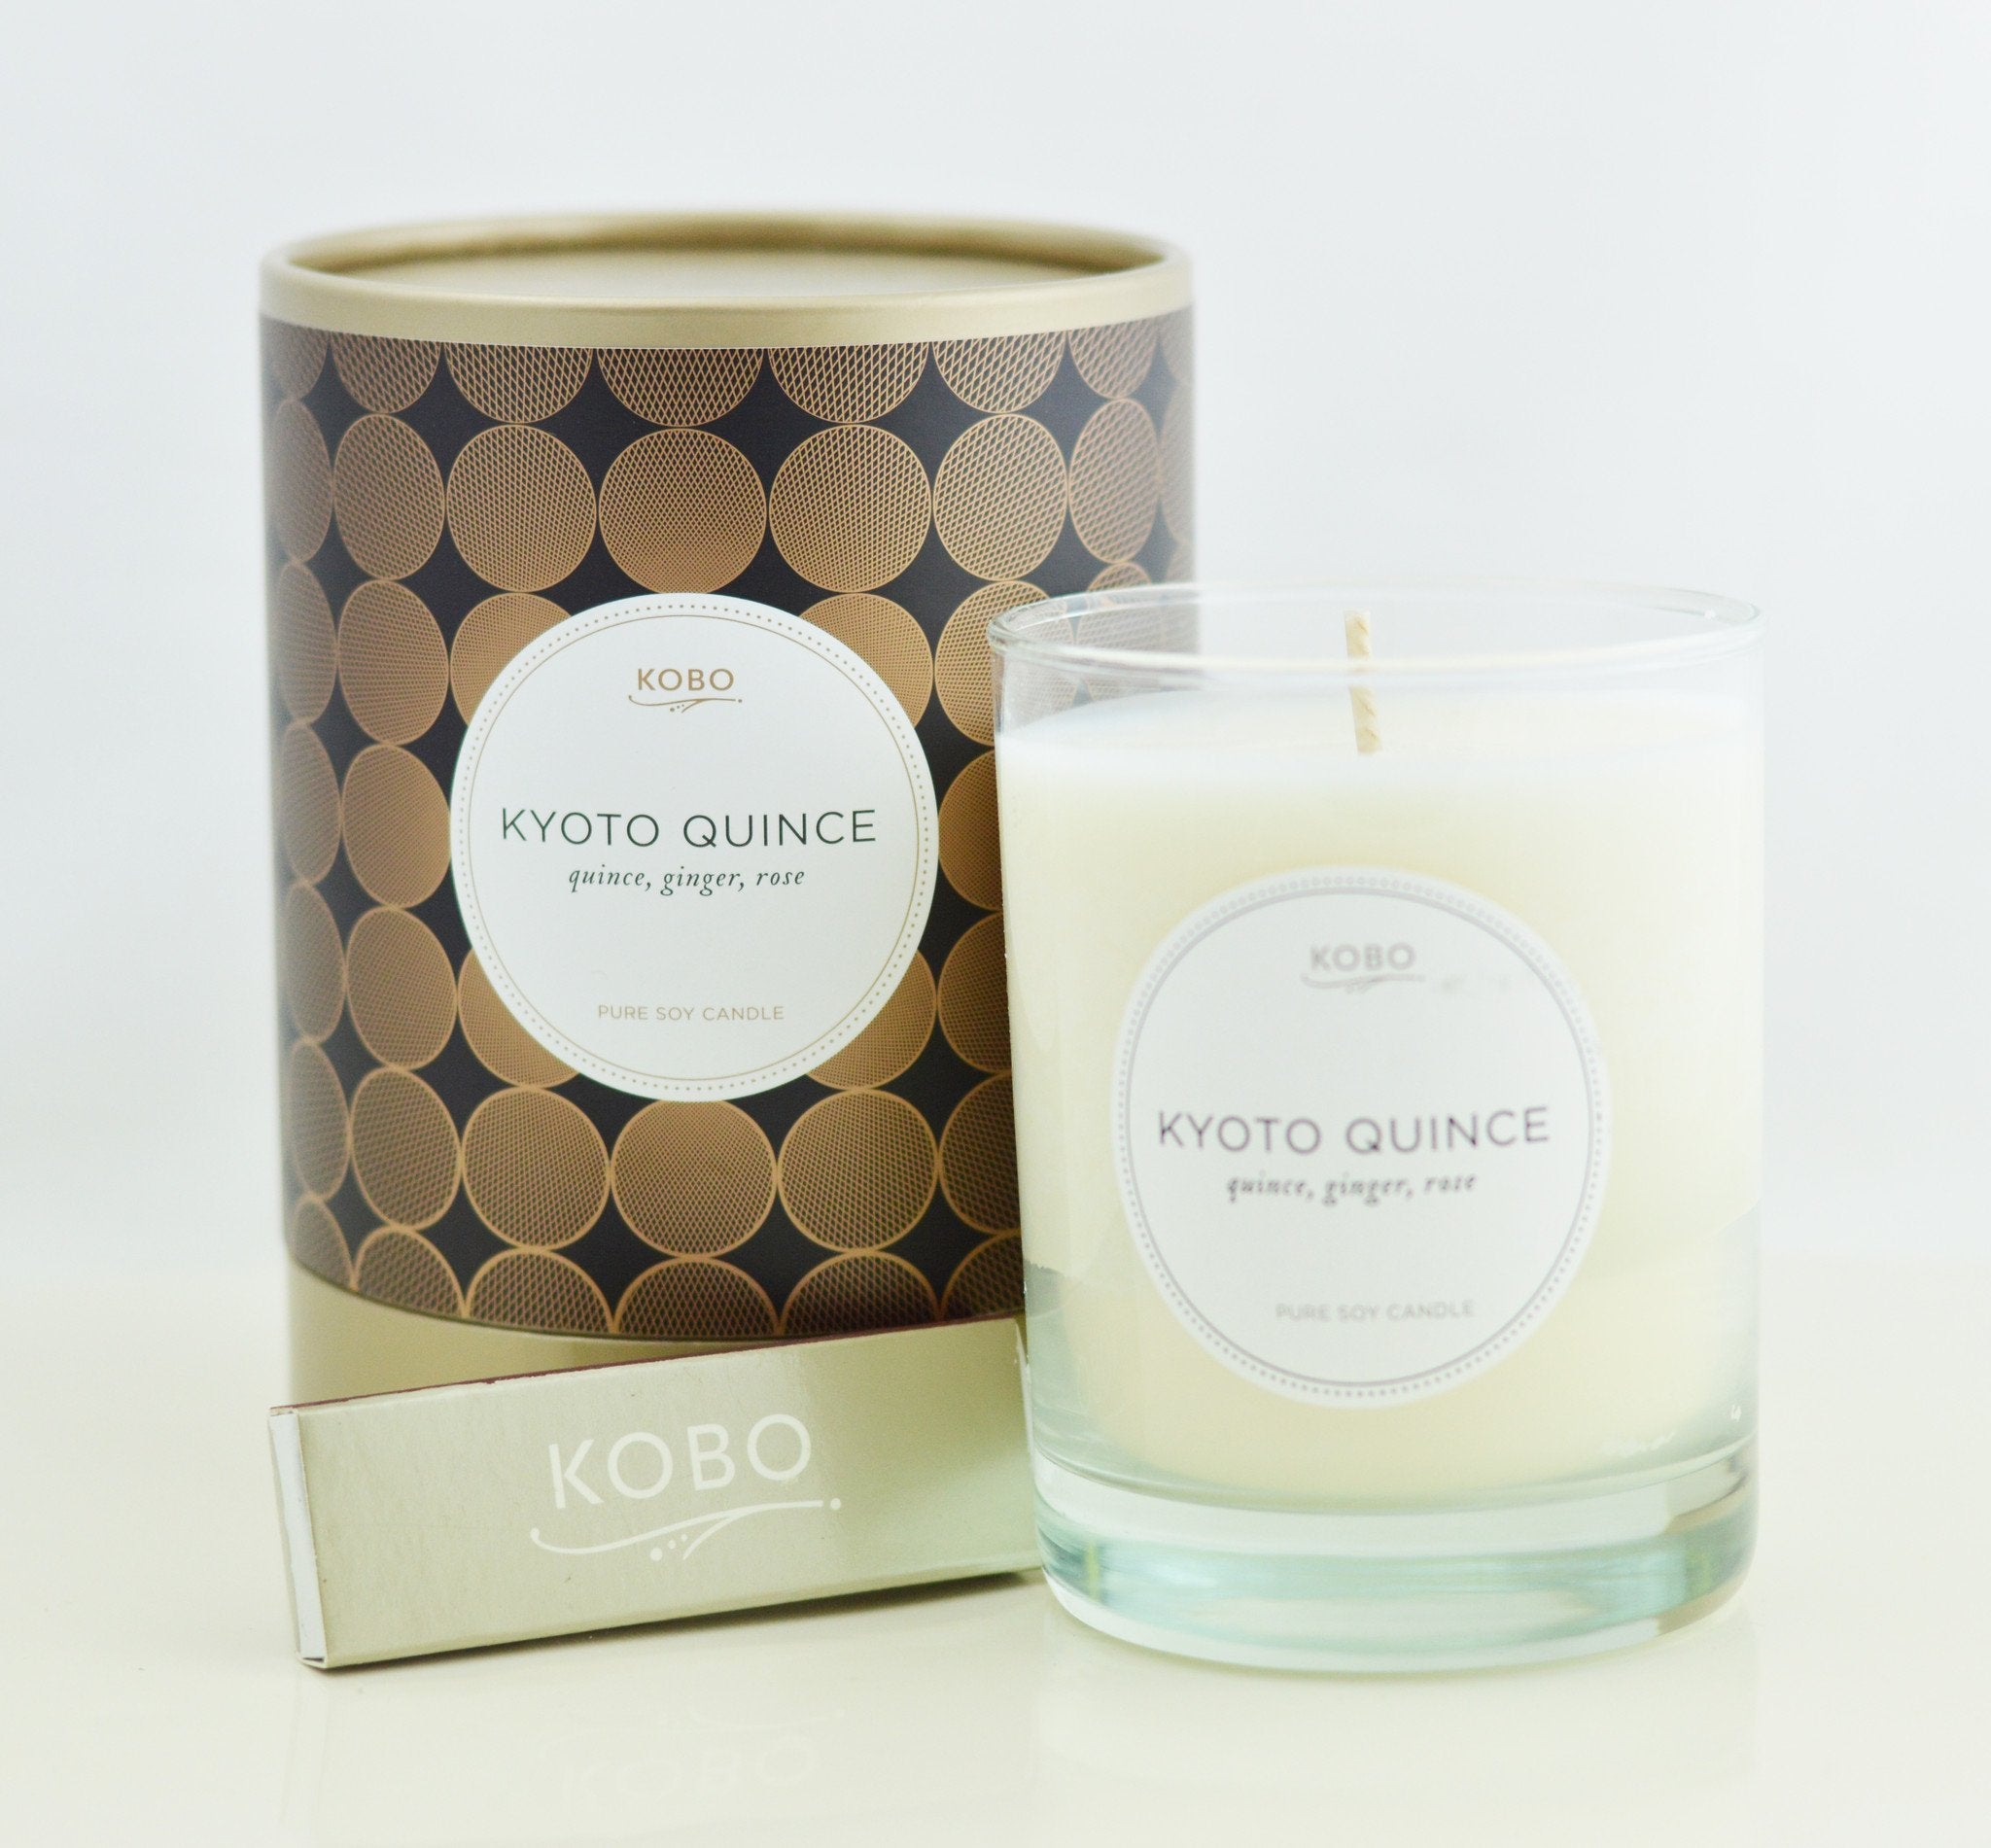 Kyoto Quince Candle design by Kobo Candles